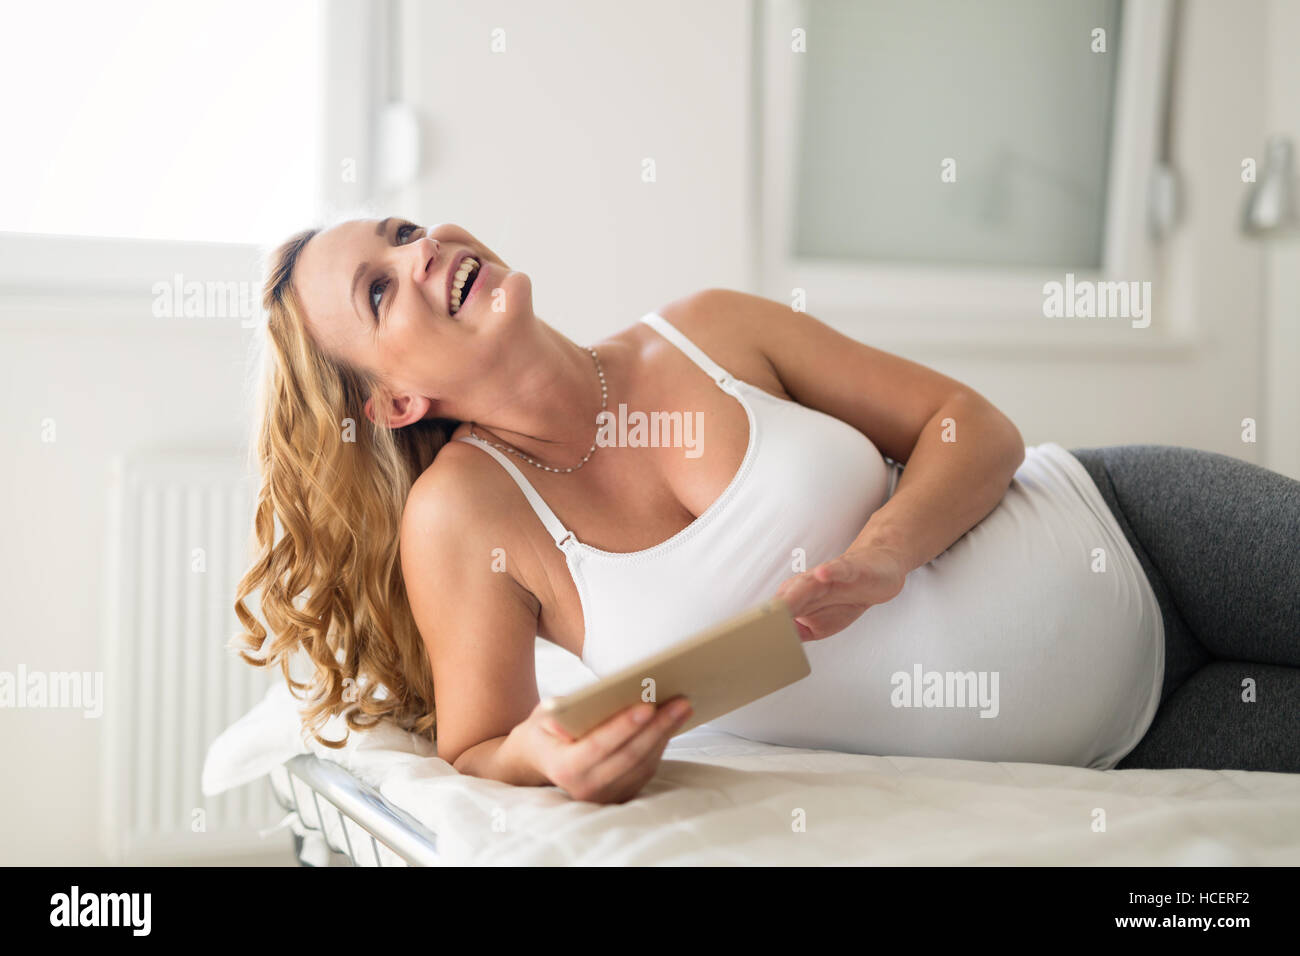 Pregnant woman relaxing and using tablet at home Stock Photo